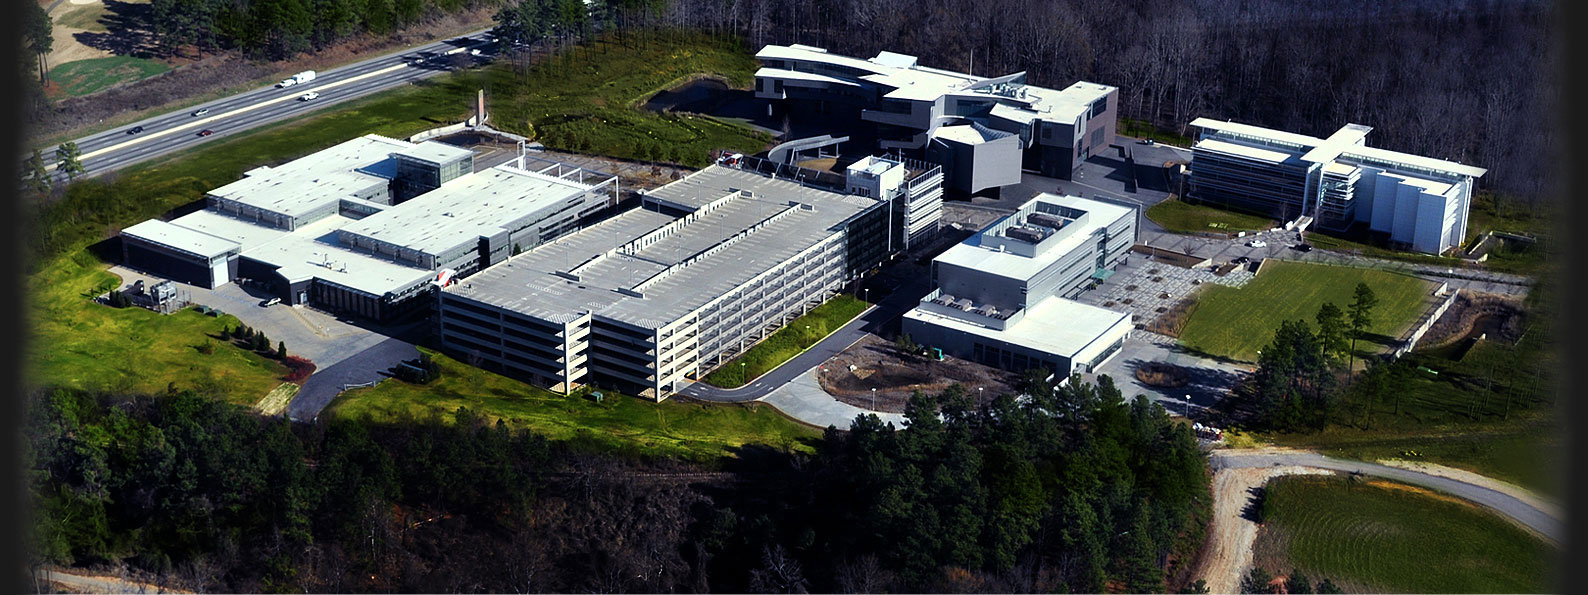 Bmw group information technology research center #1